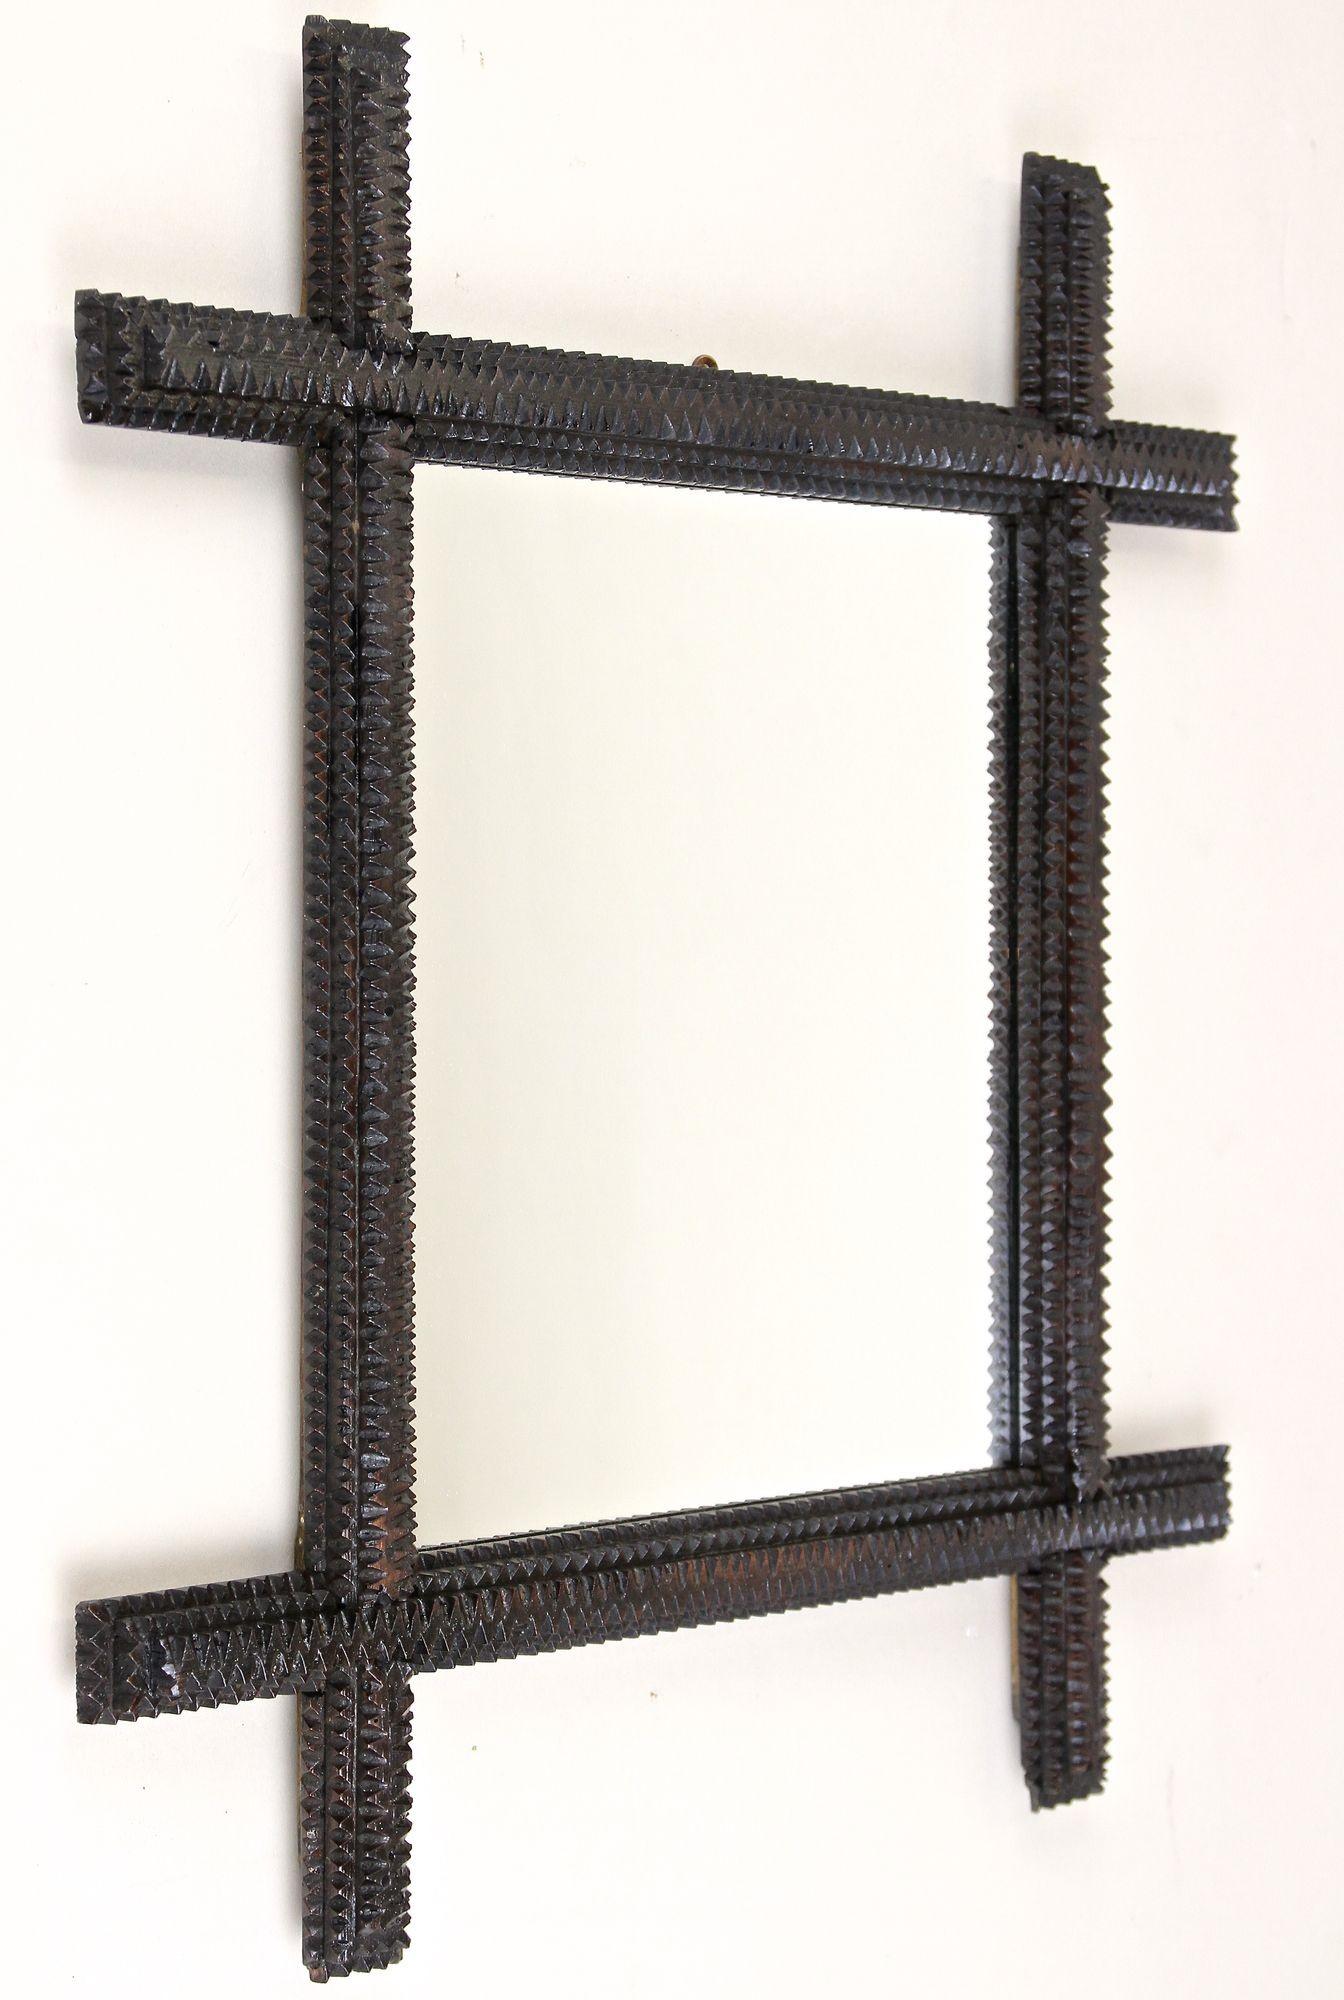 Decorative rustic Tramp Art wall mirror from the late 19th century around 1870 in Austria. Elaborately hand carved out of fine basswood, the solid frame impresses with its artfully pyramidal notch cut embedded in a simple but still spectacular